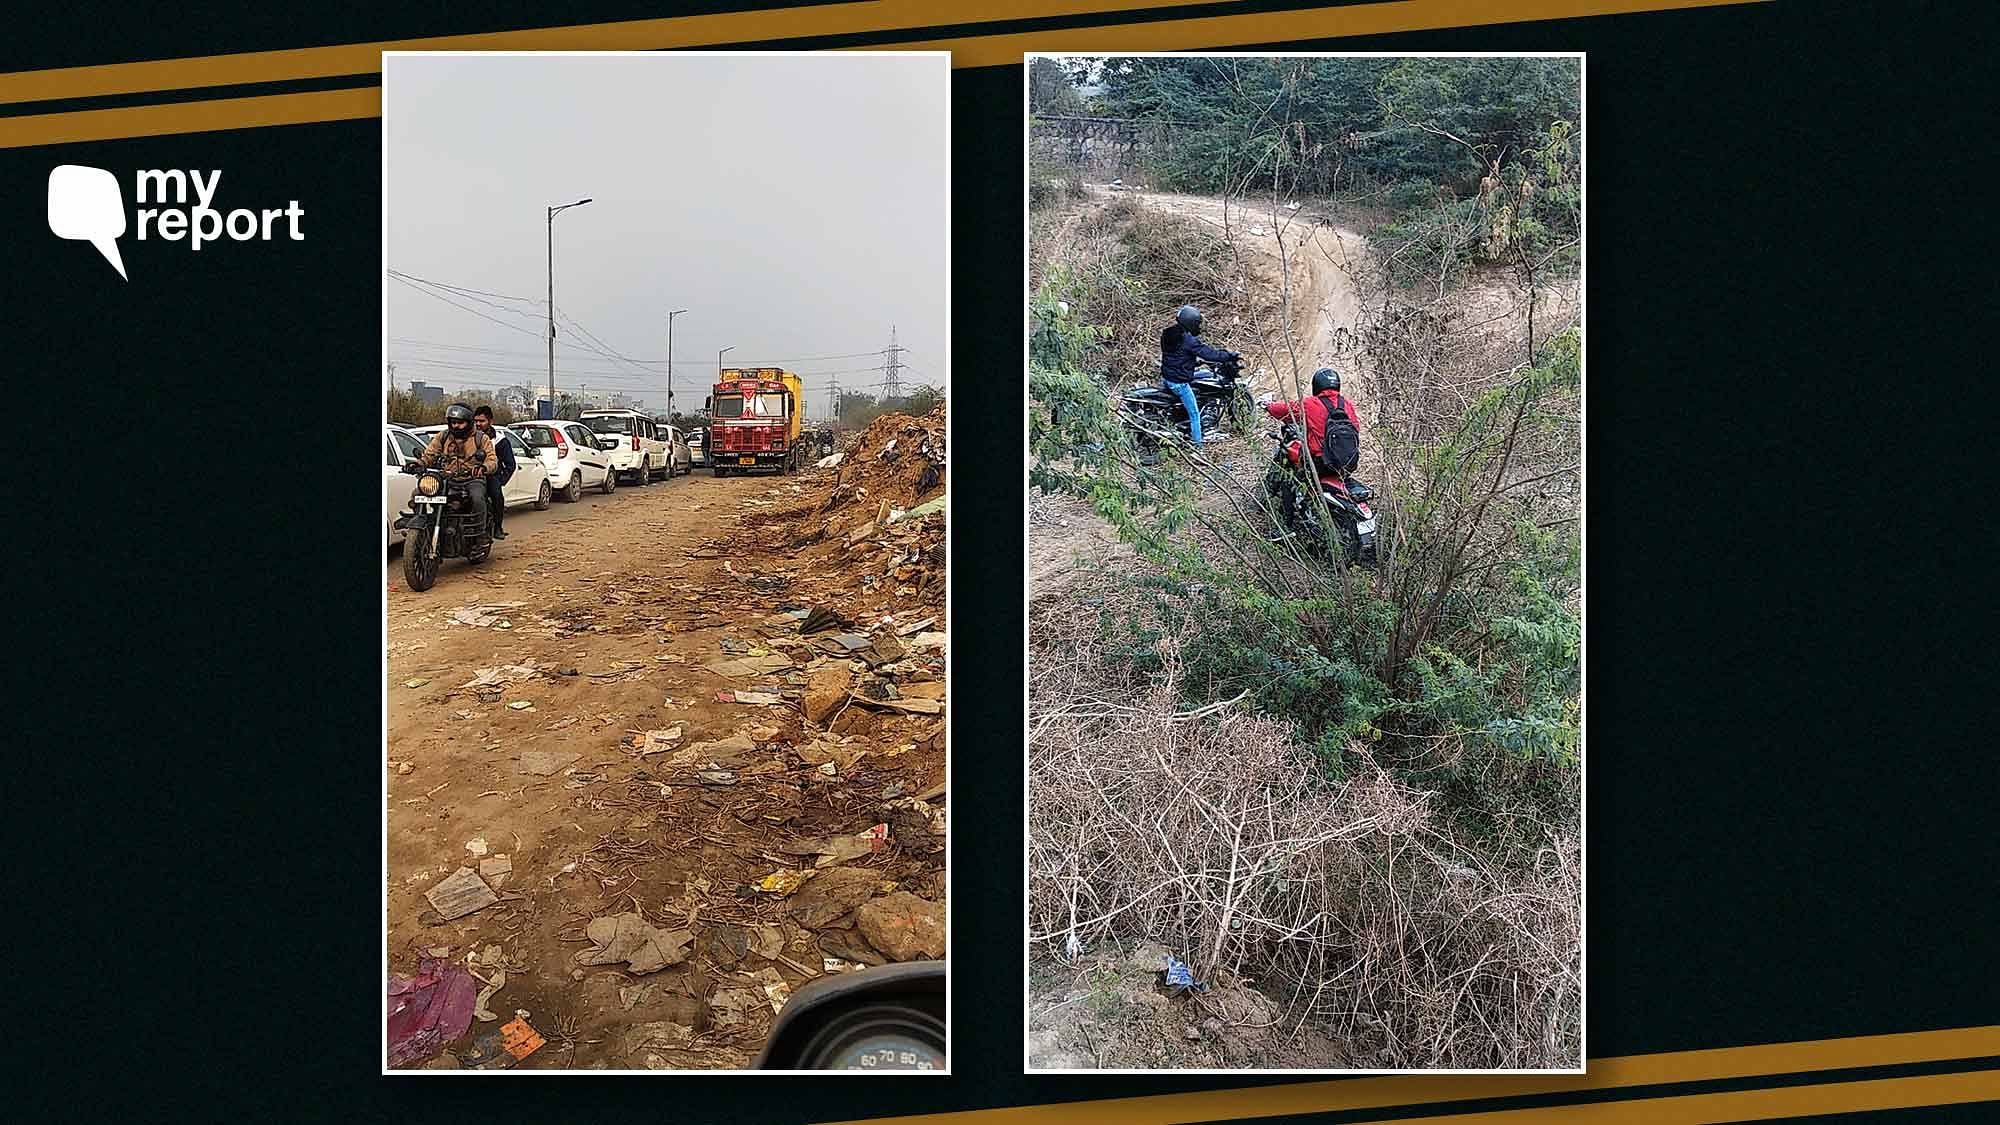 Owing to traffic in the Kalindi Kunj area, bikers are left with no choice but to go off-road.